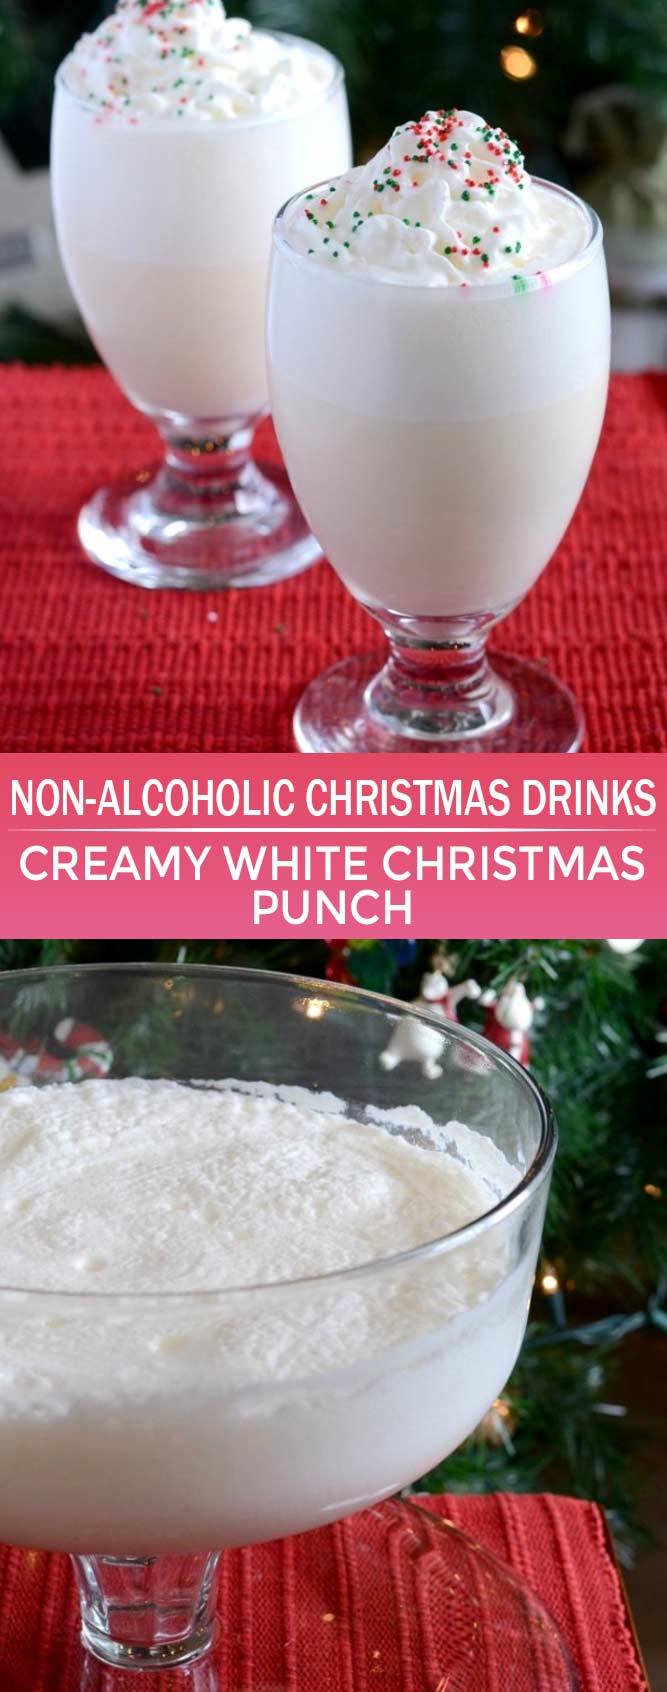 9 NonAlcoholic Christmas Drinks That Are Perfect for the Holidays